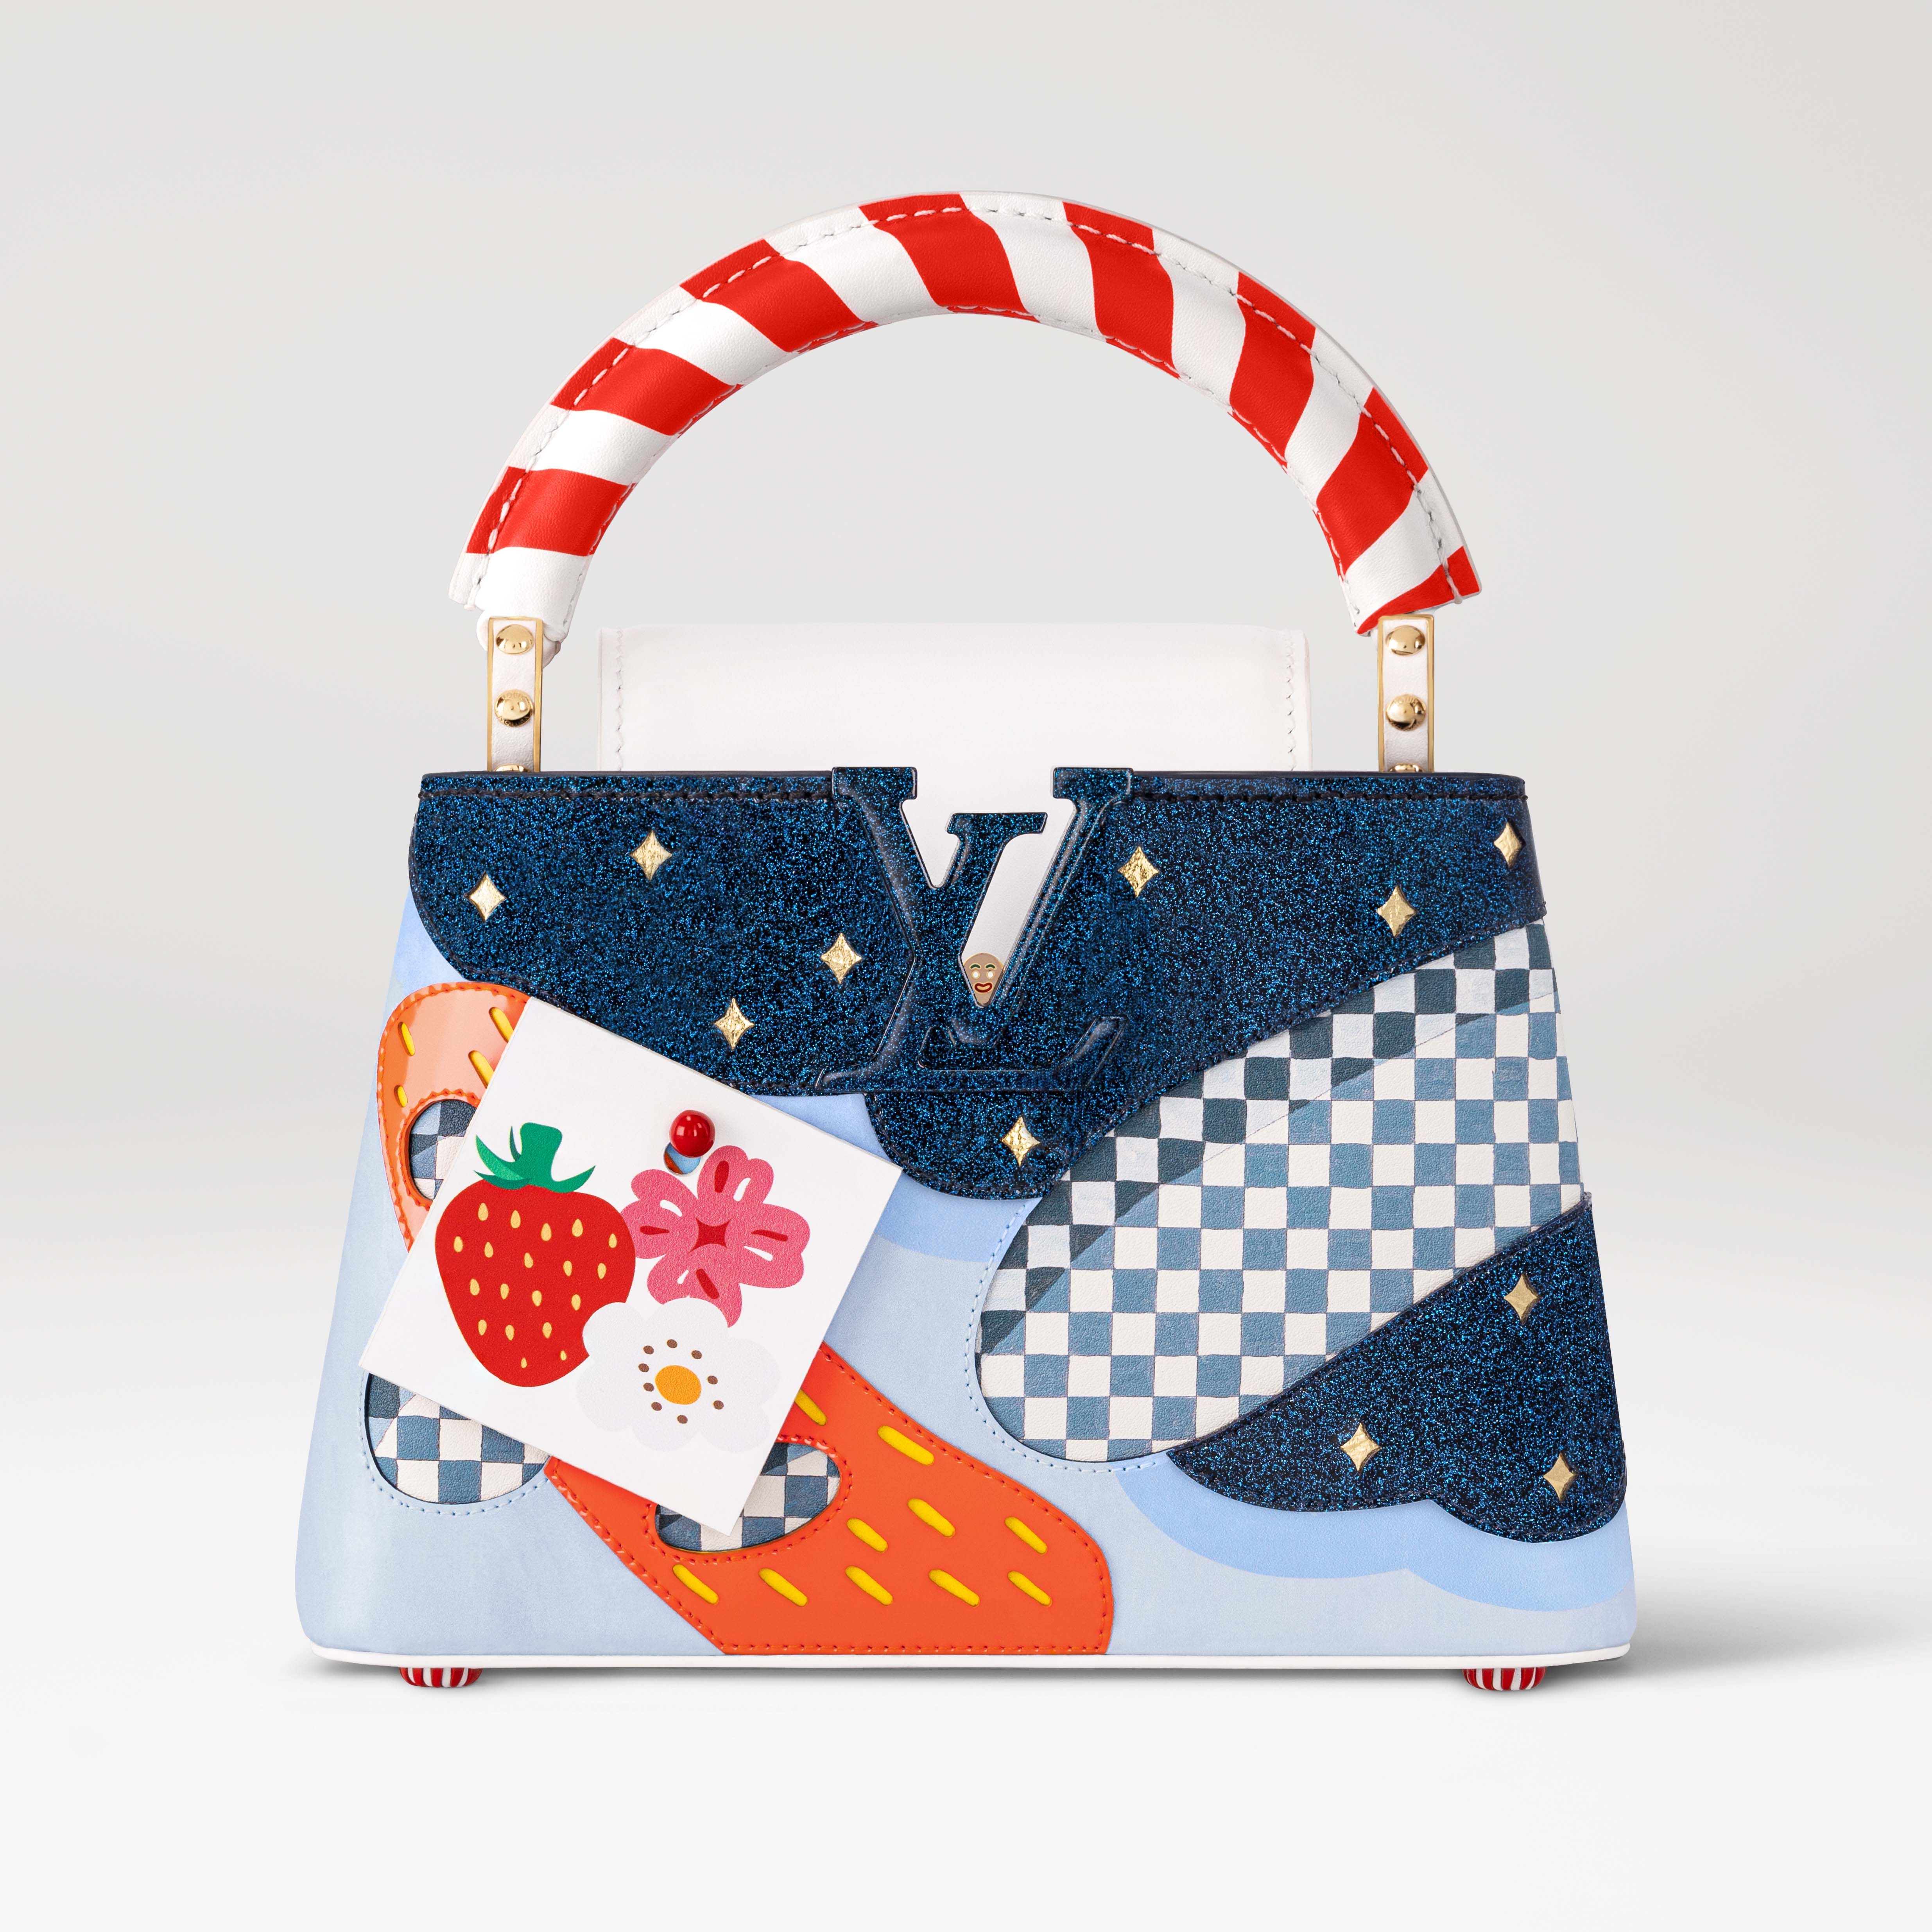 Louis Vuitton's Latest Artycapucines Style Collection